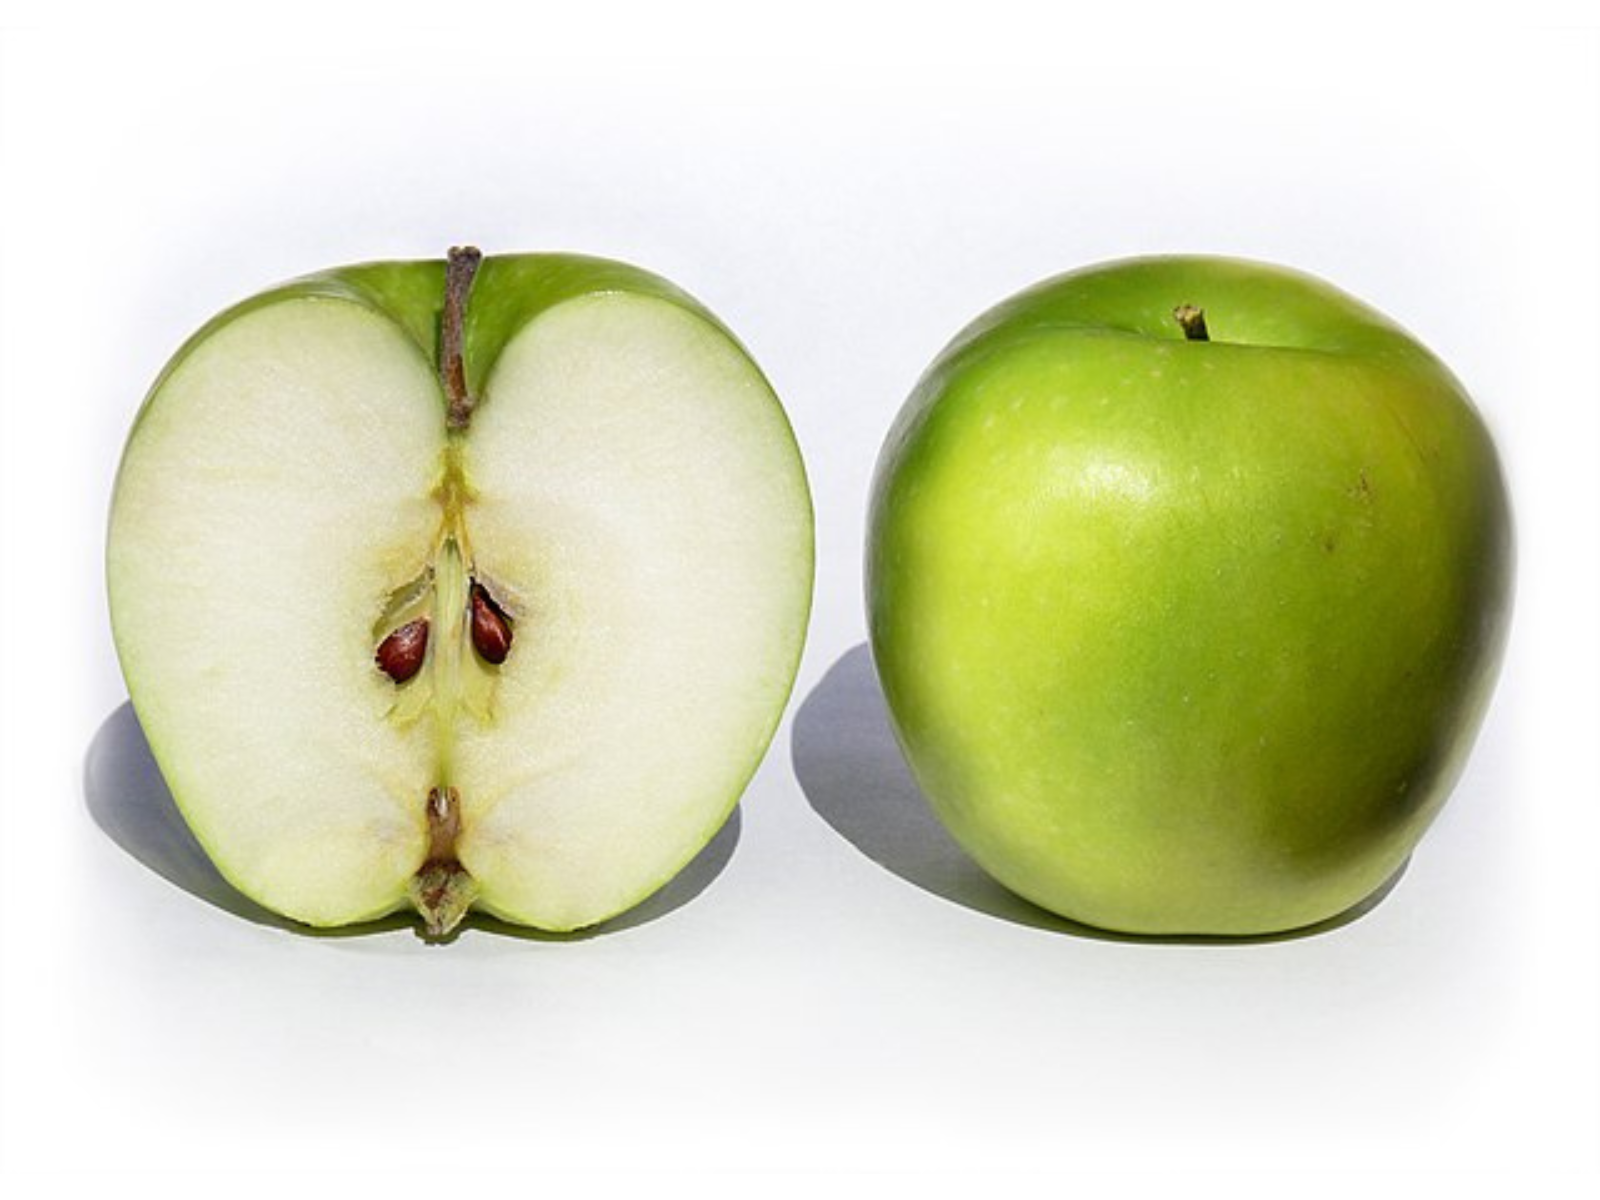 Two apples on a white background. The apple on the left is cut open, showing the inside. The apple on the right is whole showing its green skin.